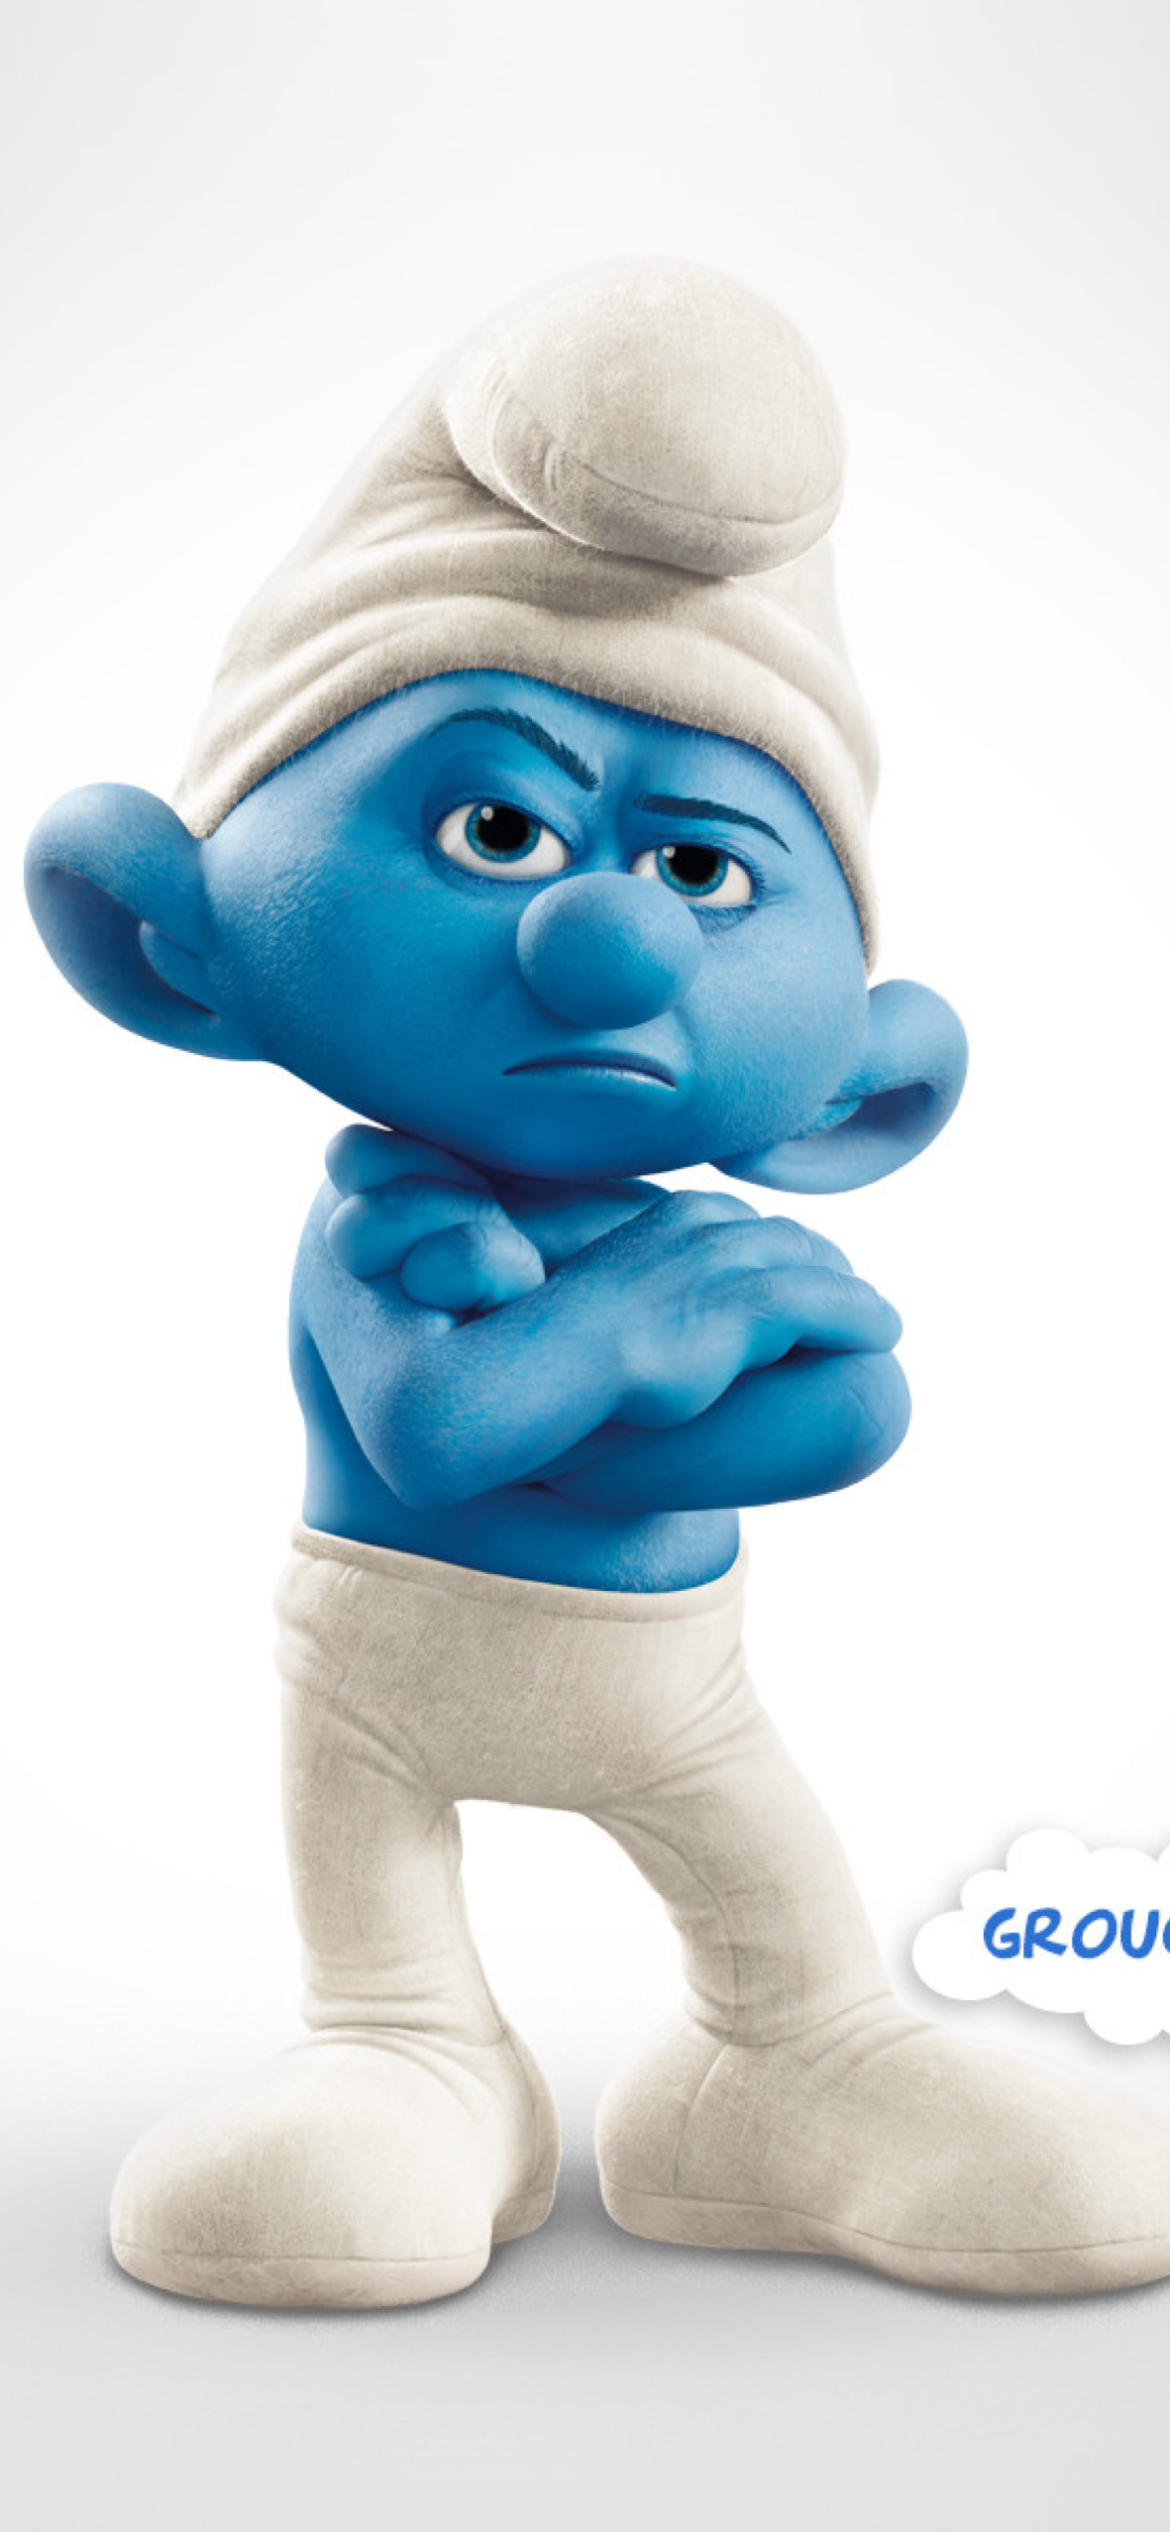 Grouchy The Smurfs 2 wallpaper 1170x2532